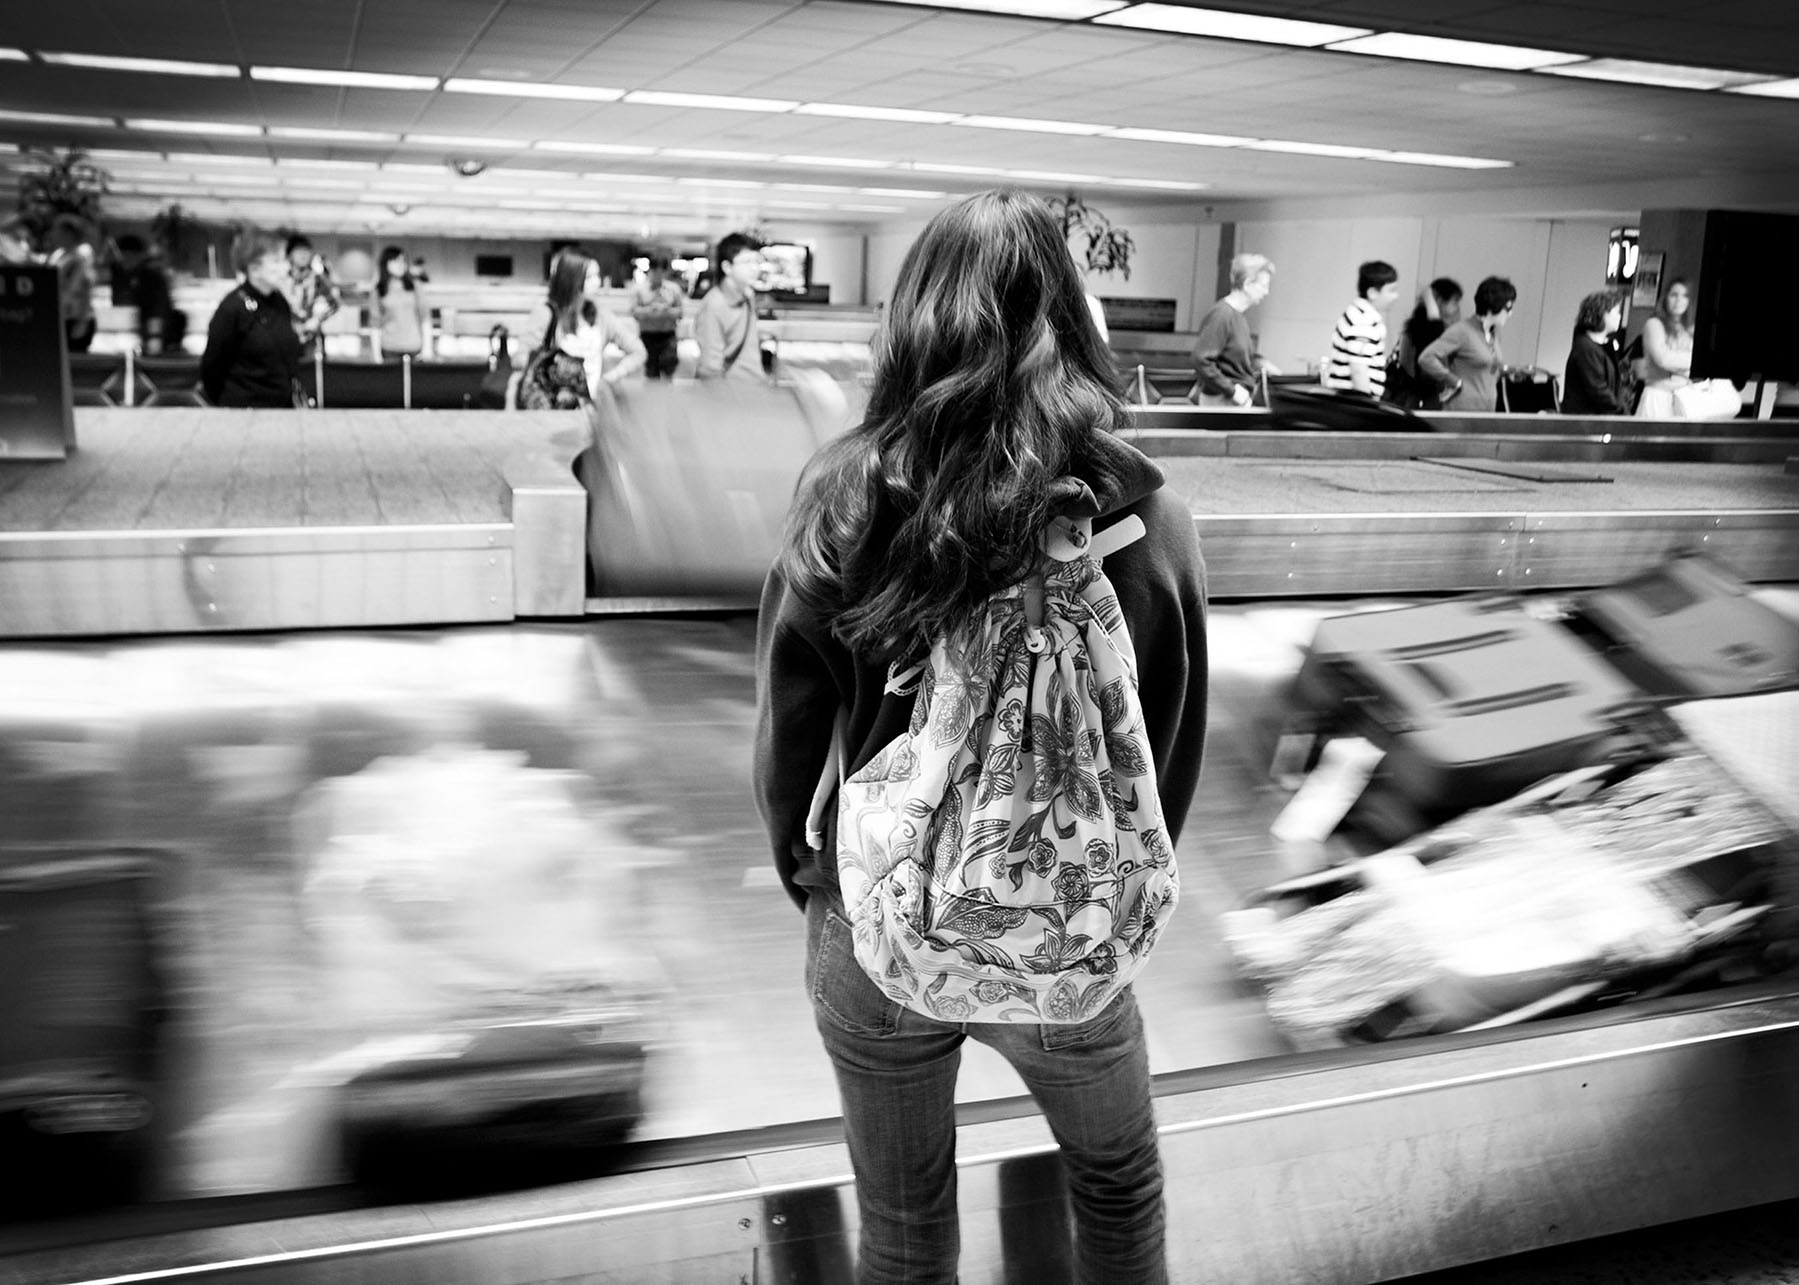 A young woman waits at the baggage claim carousel in an airport. (Photo by Tejas Califas.)